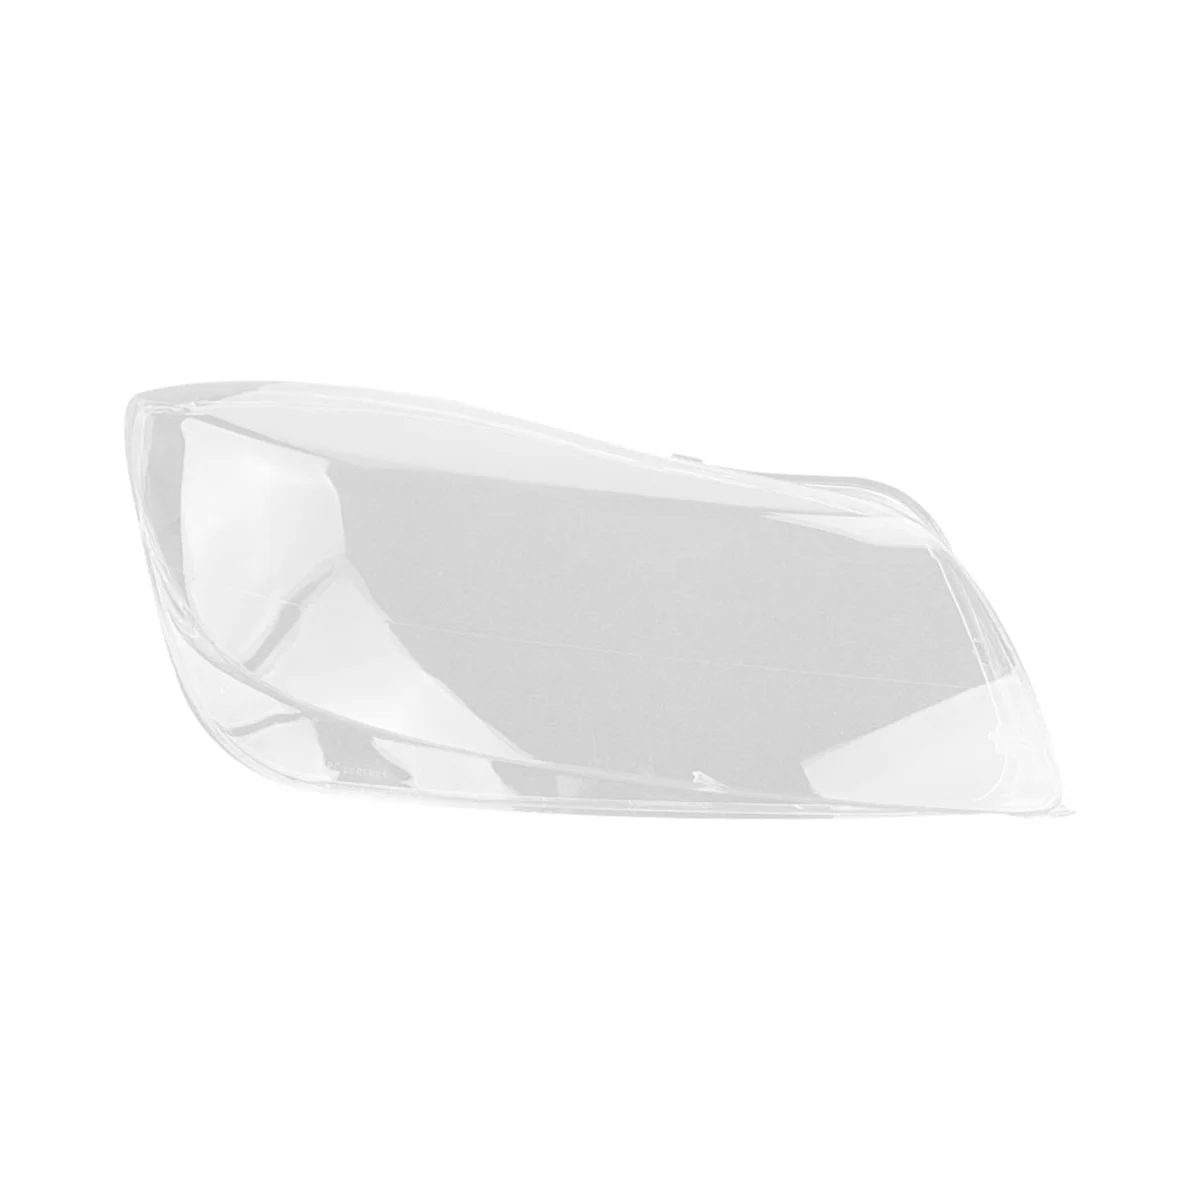 

Car Right Headlight Shell Lamp Shade Transparent Lens Cover Headlight Cover for Buick Opel Insignia OPC 2009-2012